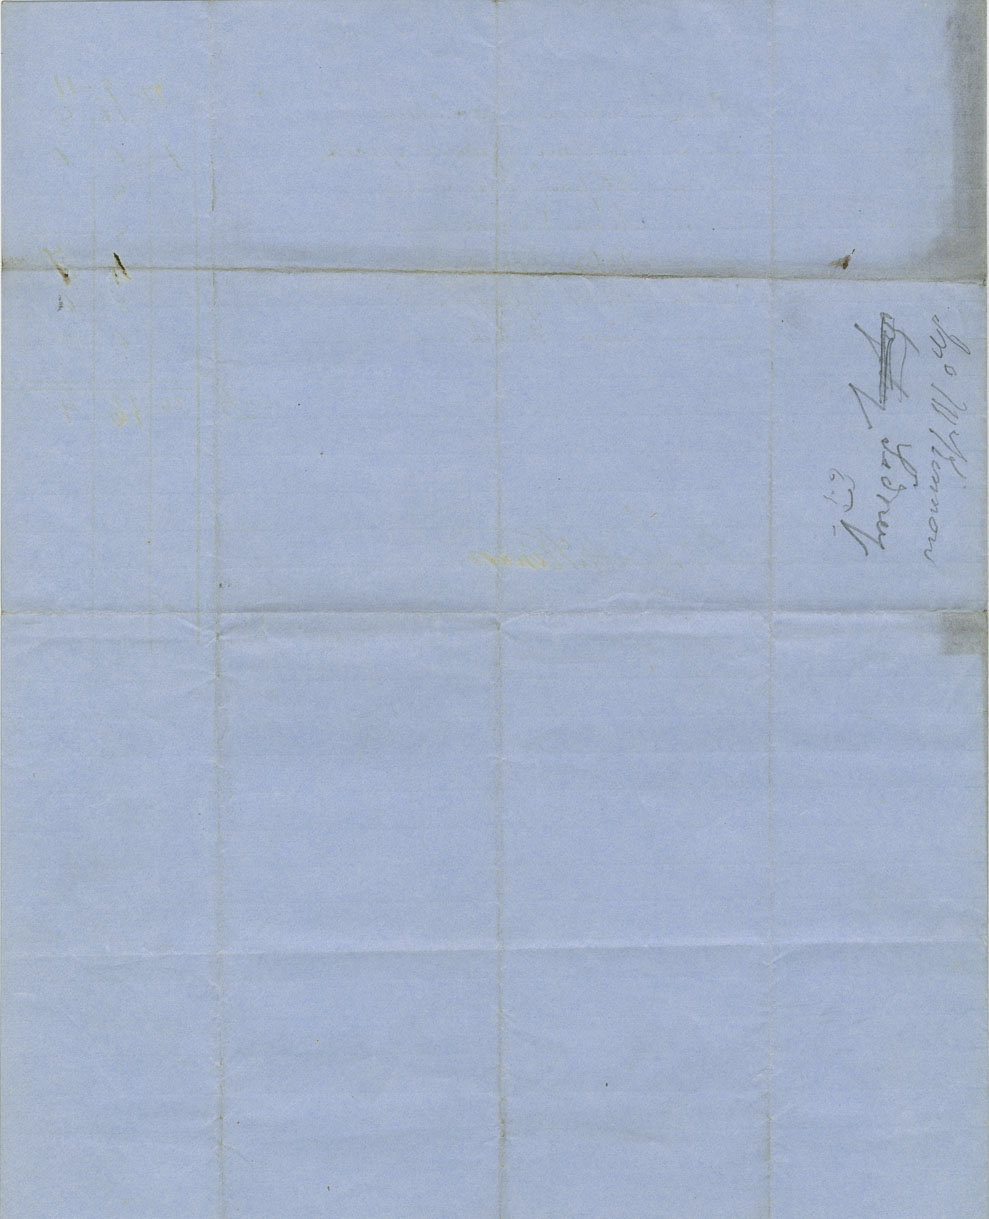 Account of the distribution of monies granted to the Mi'kmaq of Sydney County in 1854. Names mentioned.